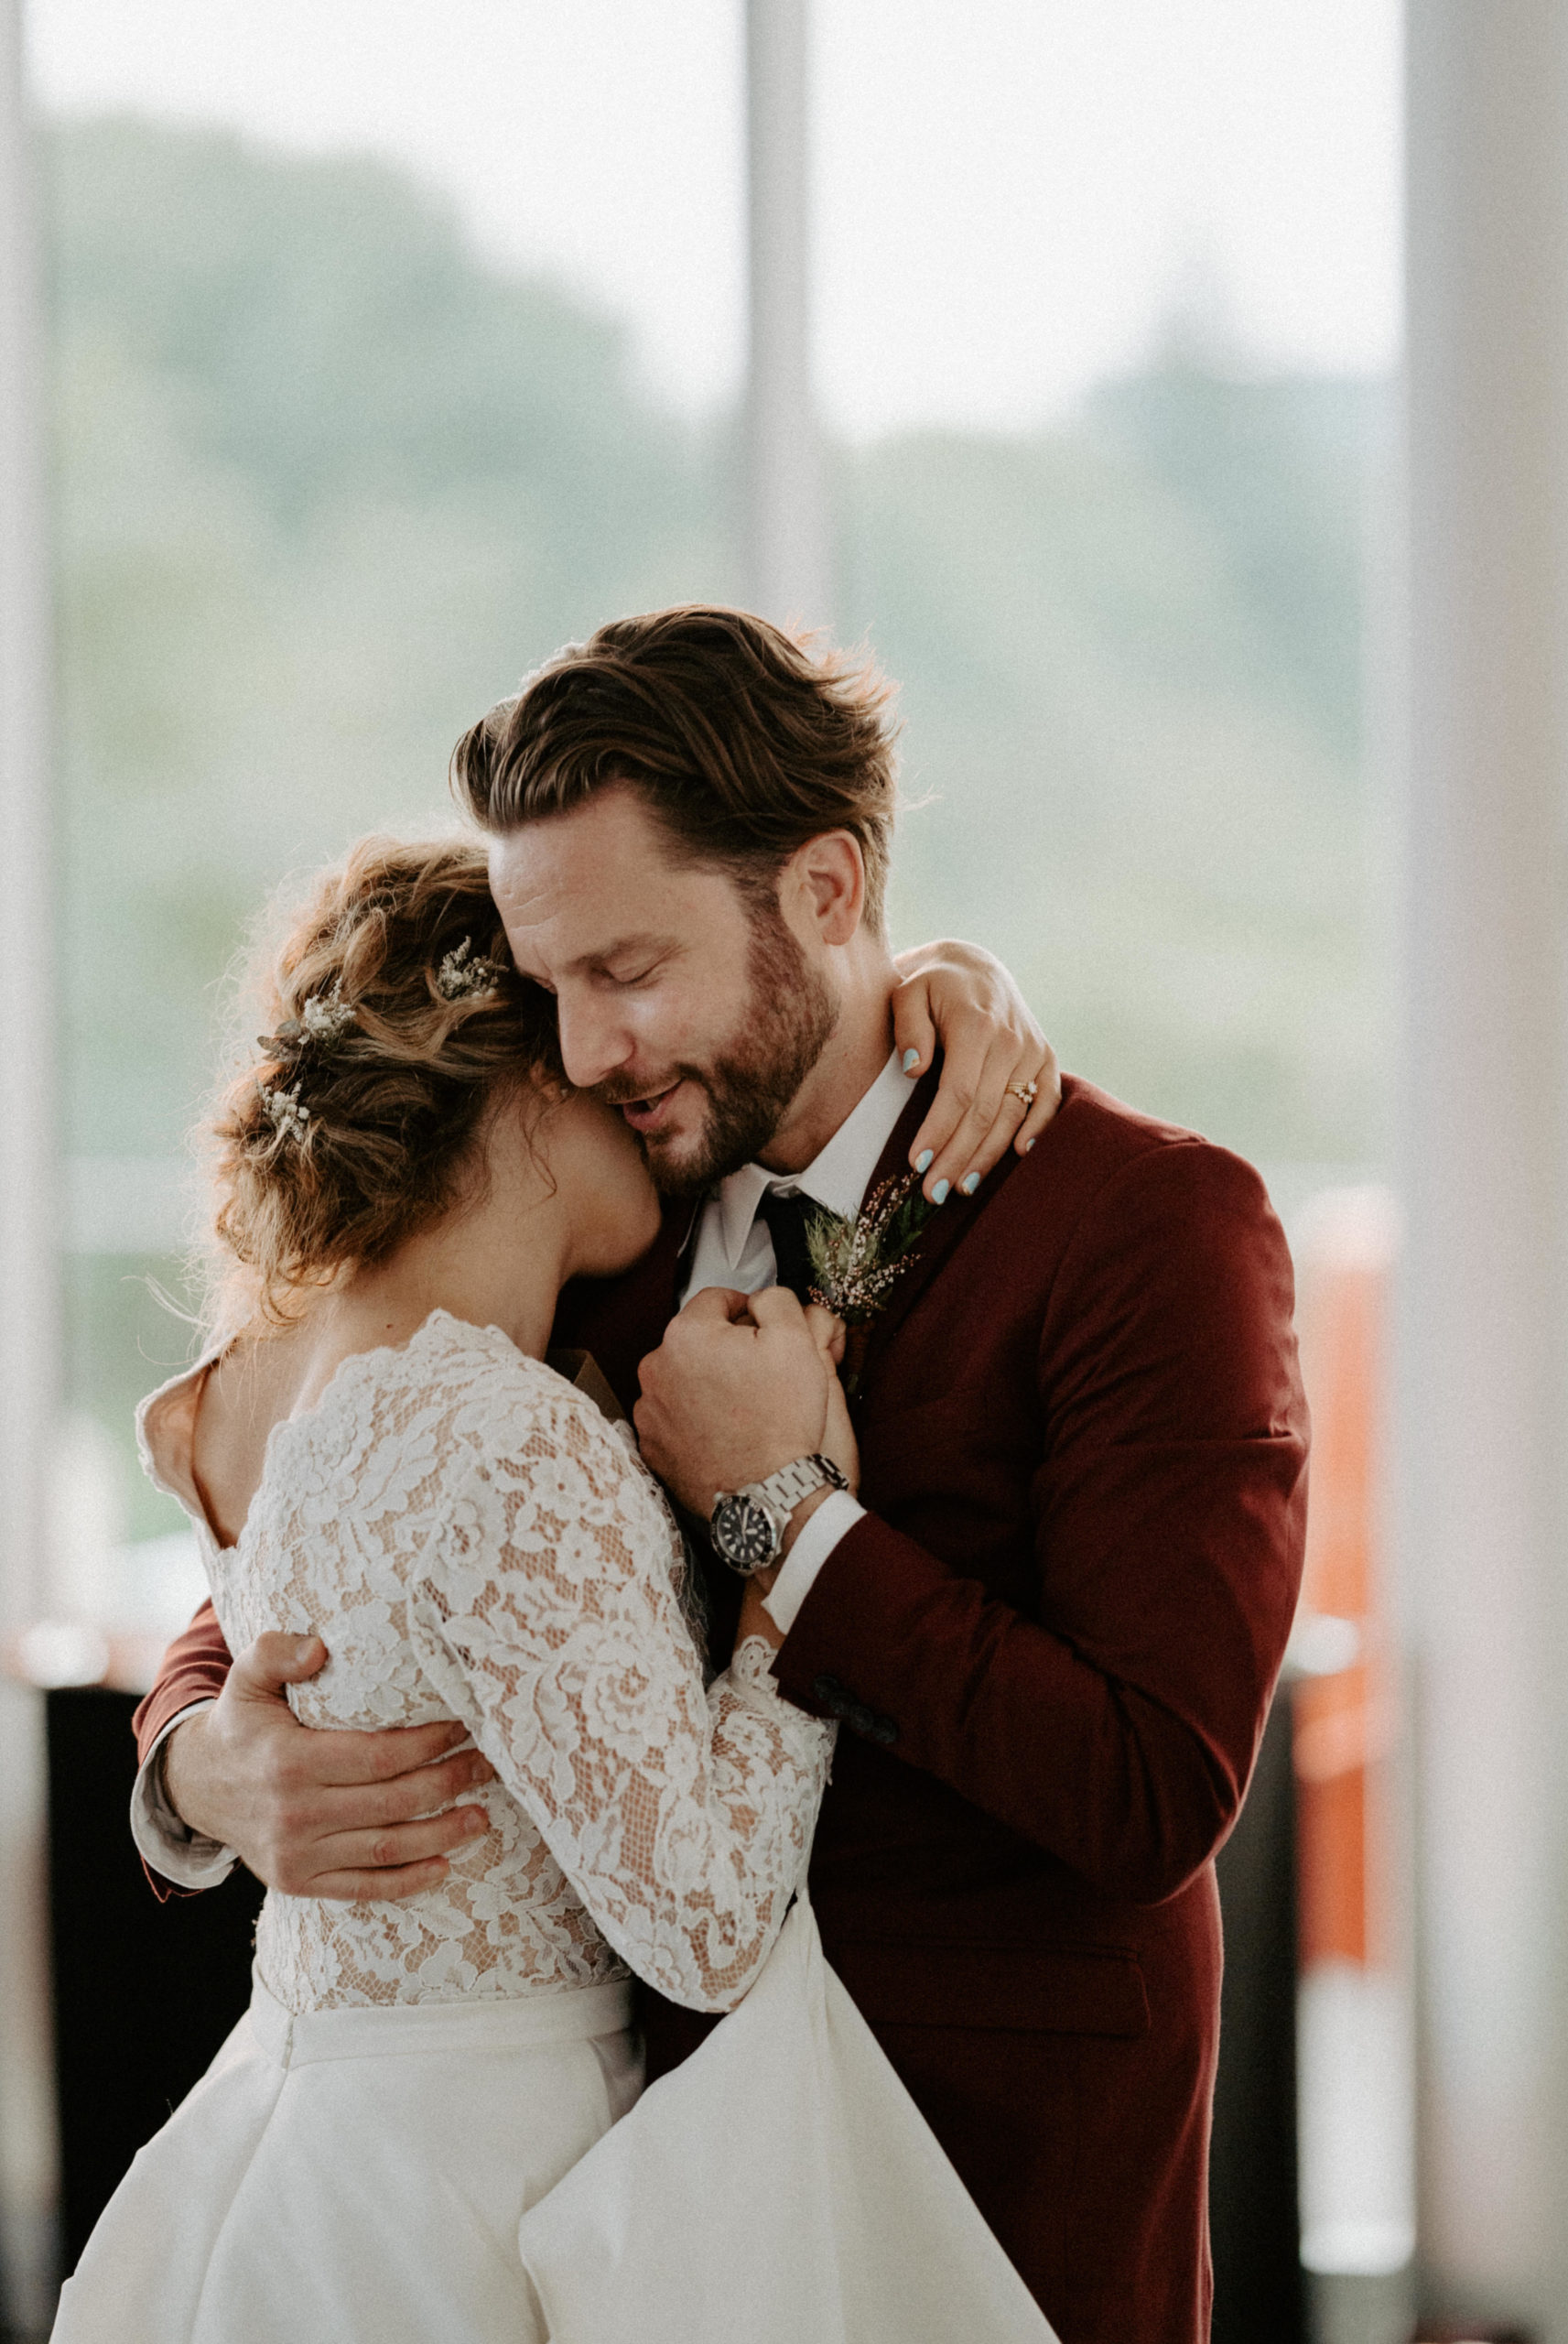 A bride and groom share an intimate embrace during their first dance at their wedding, with the bride wearing a lace gown and the groom in a burgundy suit, their foreheads touching and eyes closed, capturing a tender and emotional moment.